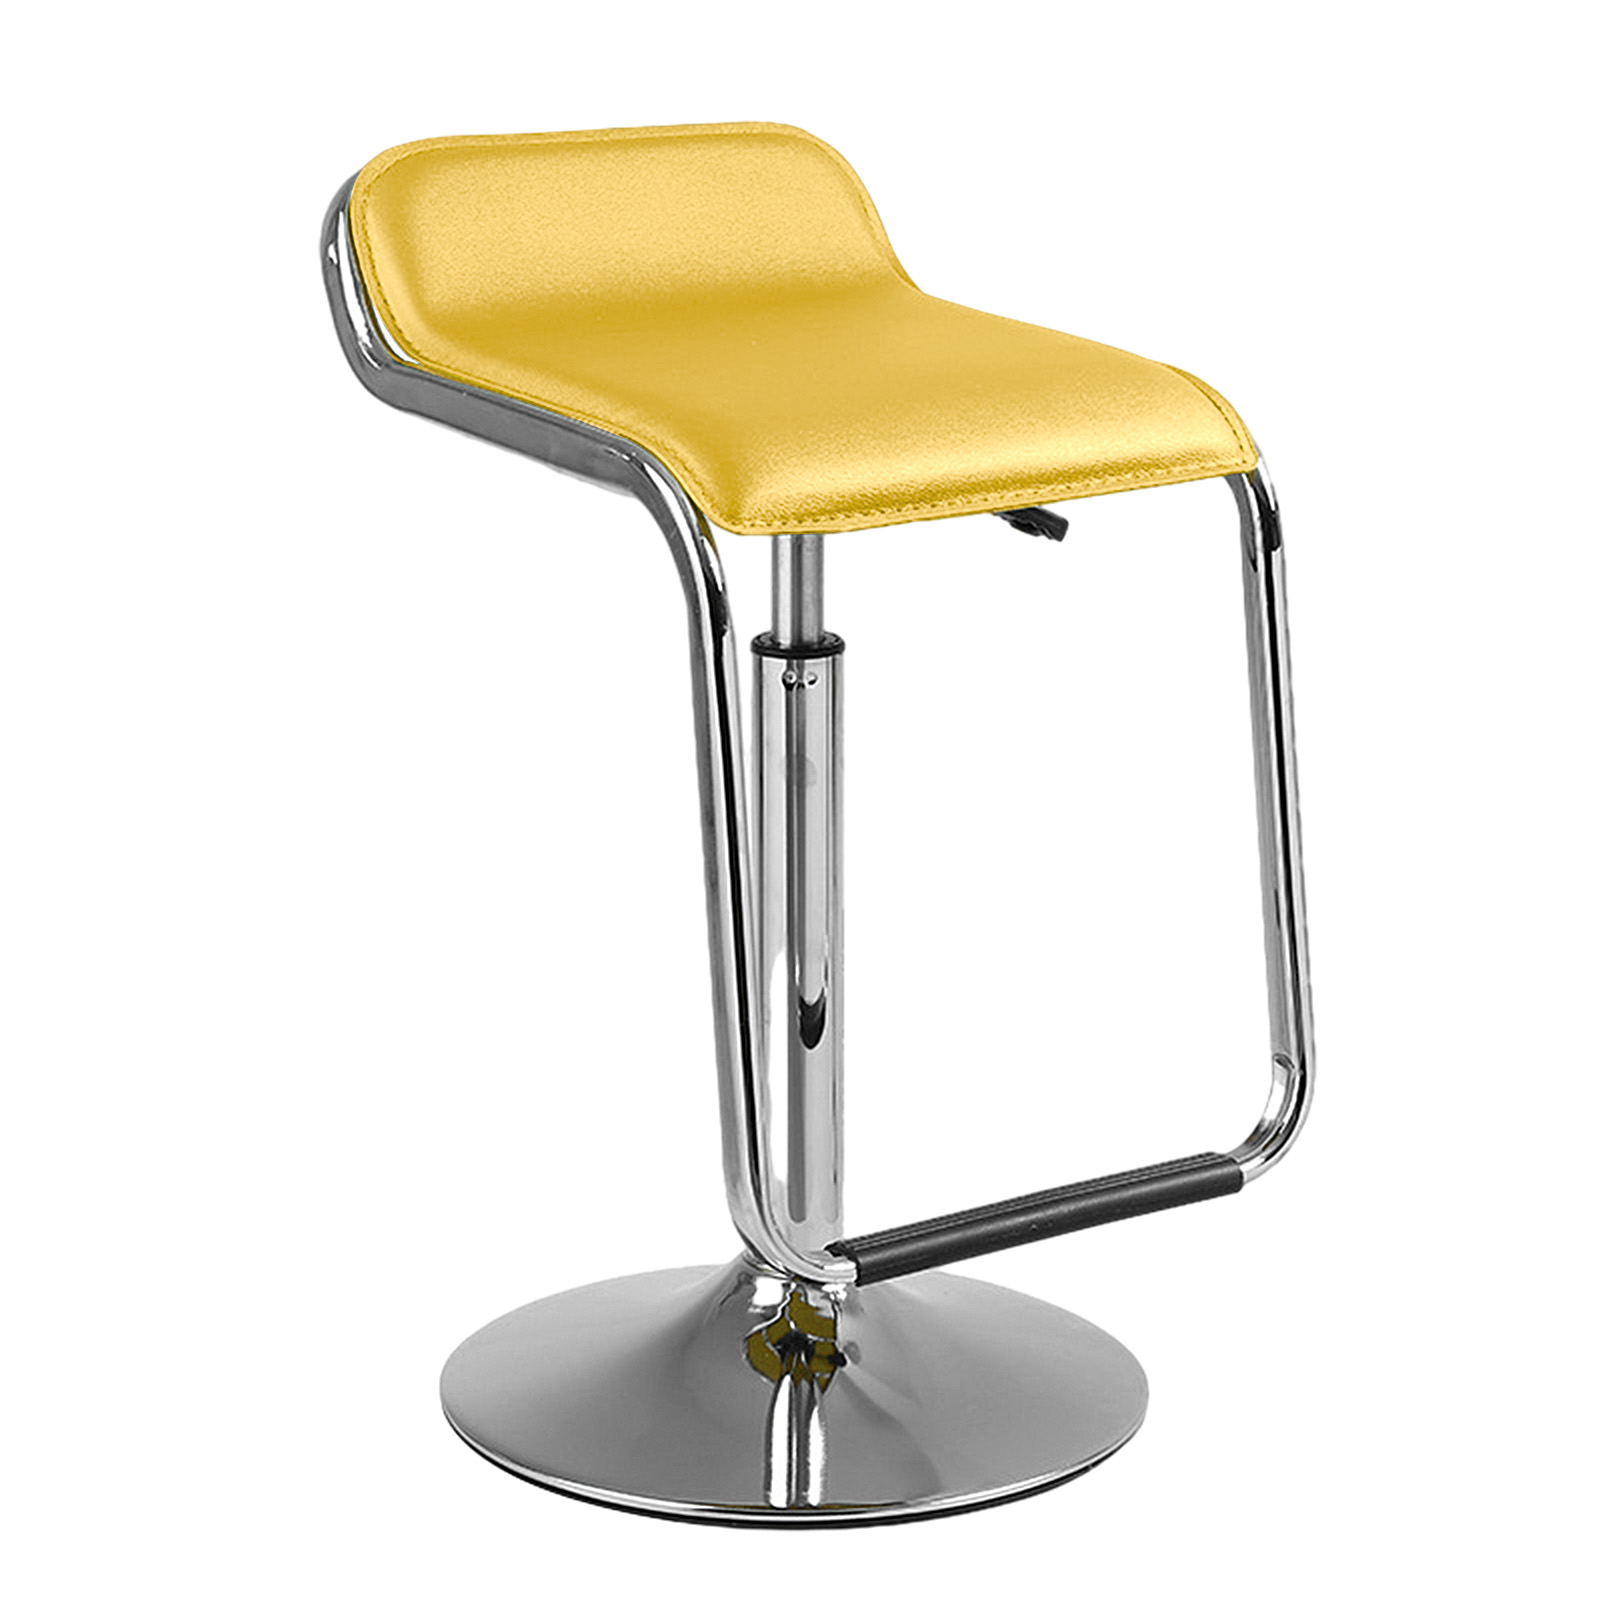 S chair round drag. - Yellow